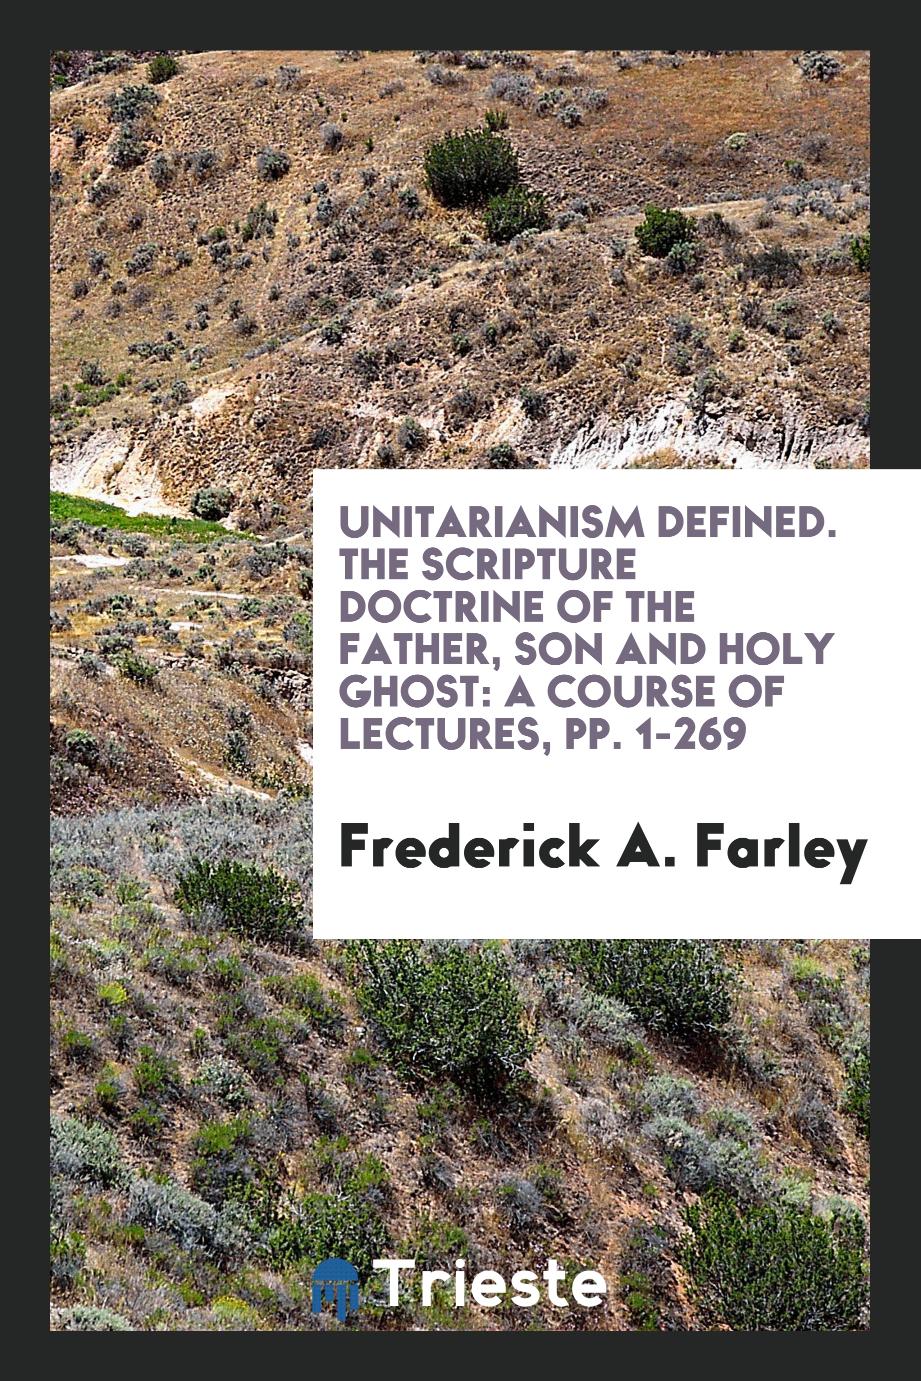 Unitarianism Defined. The Scripture Doctrine of the Father, Son and Holy Ghost: A Course of Lectures, pp. 1-269